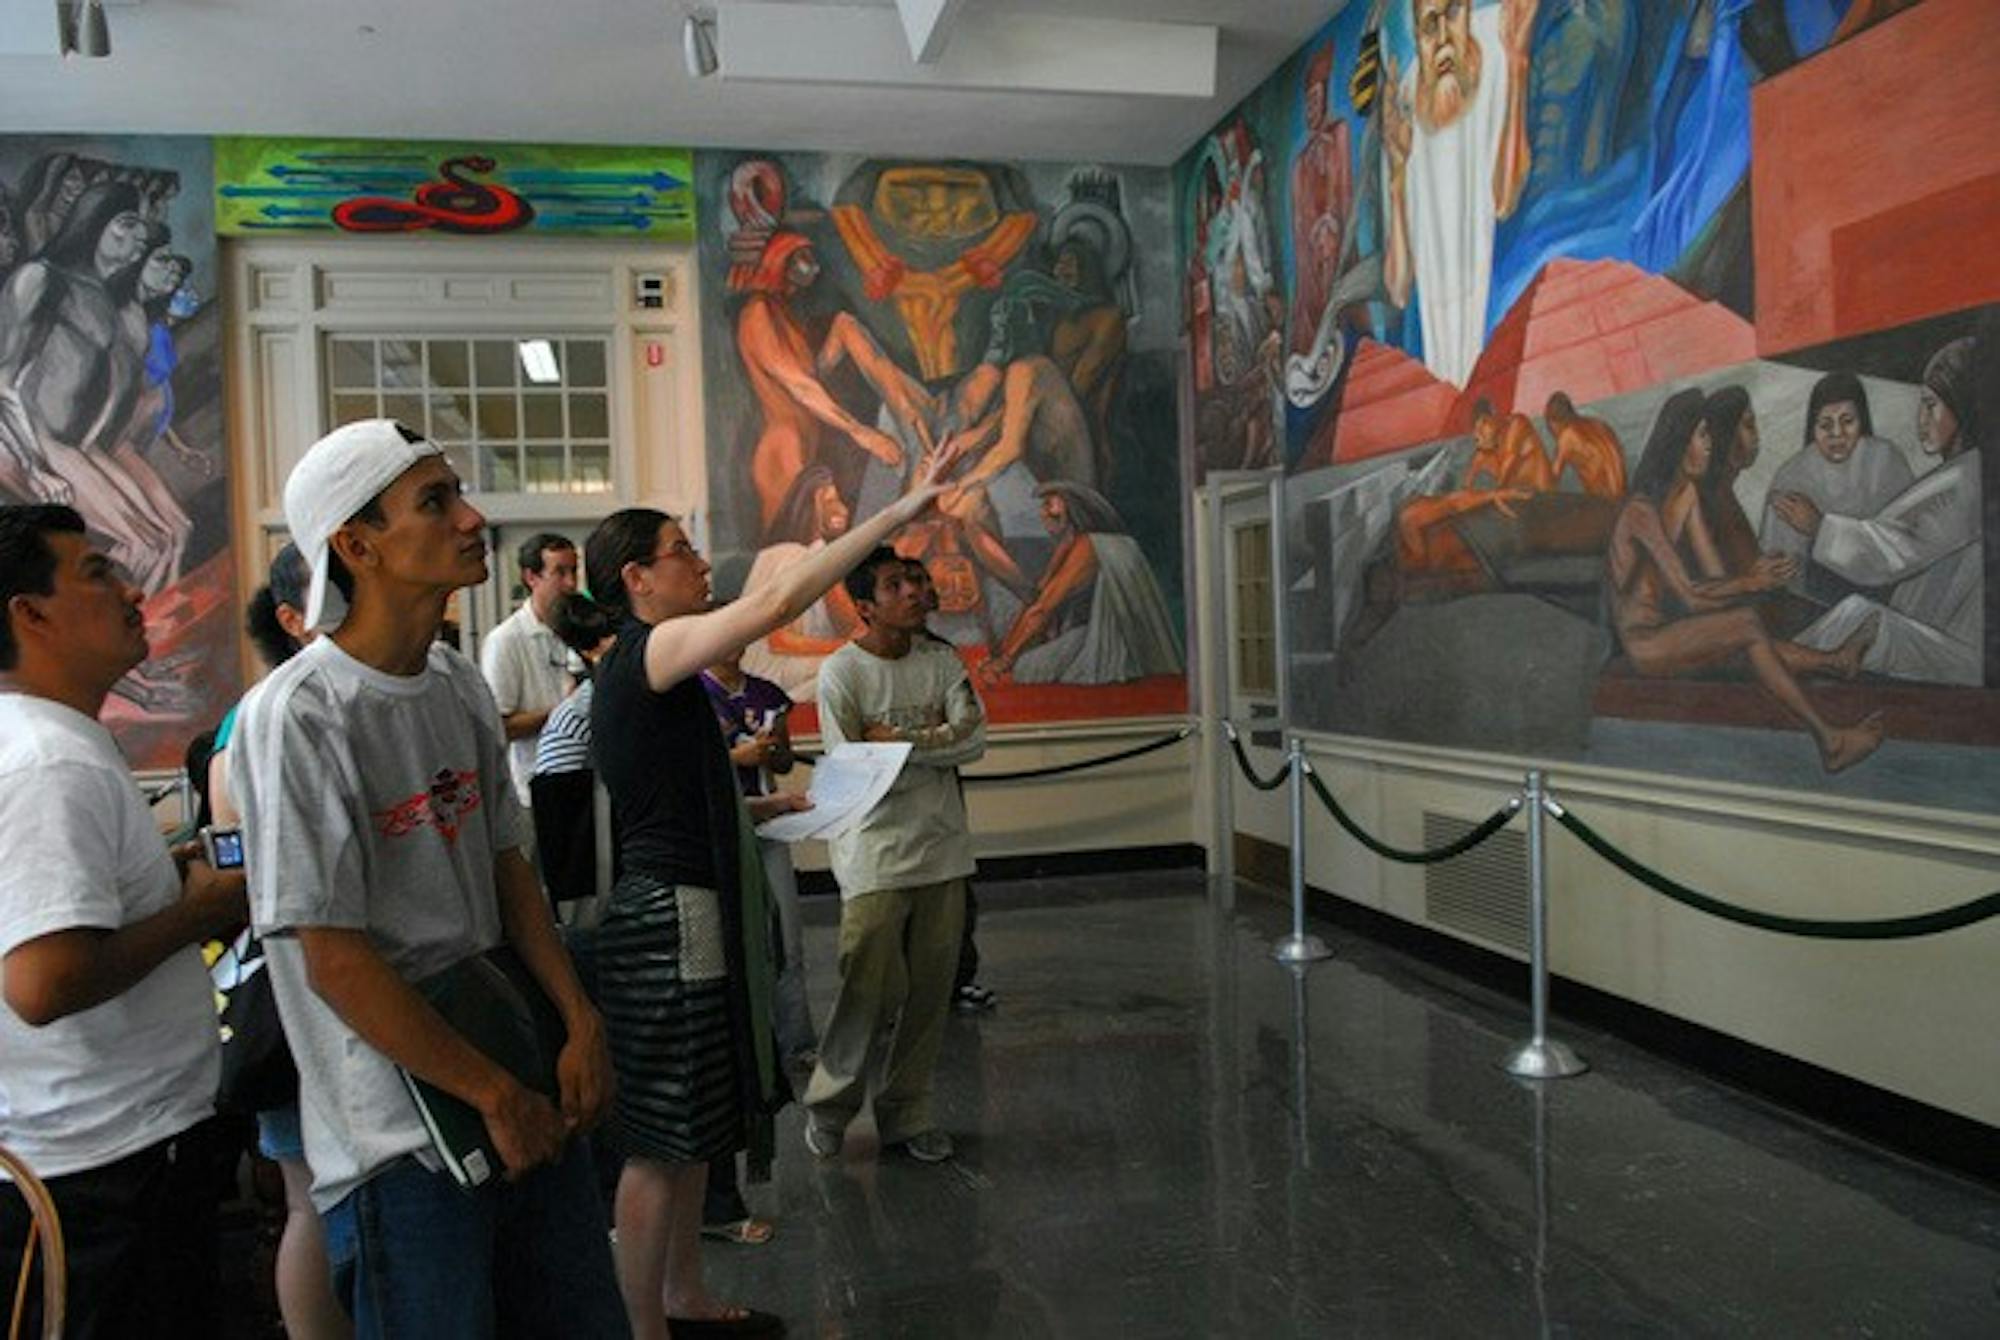 Nicaraguan students participating in the cross-cultural exchange admire the Orozco murals in the reserve corridor of Baker library.